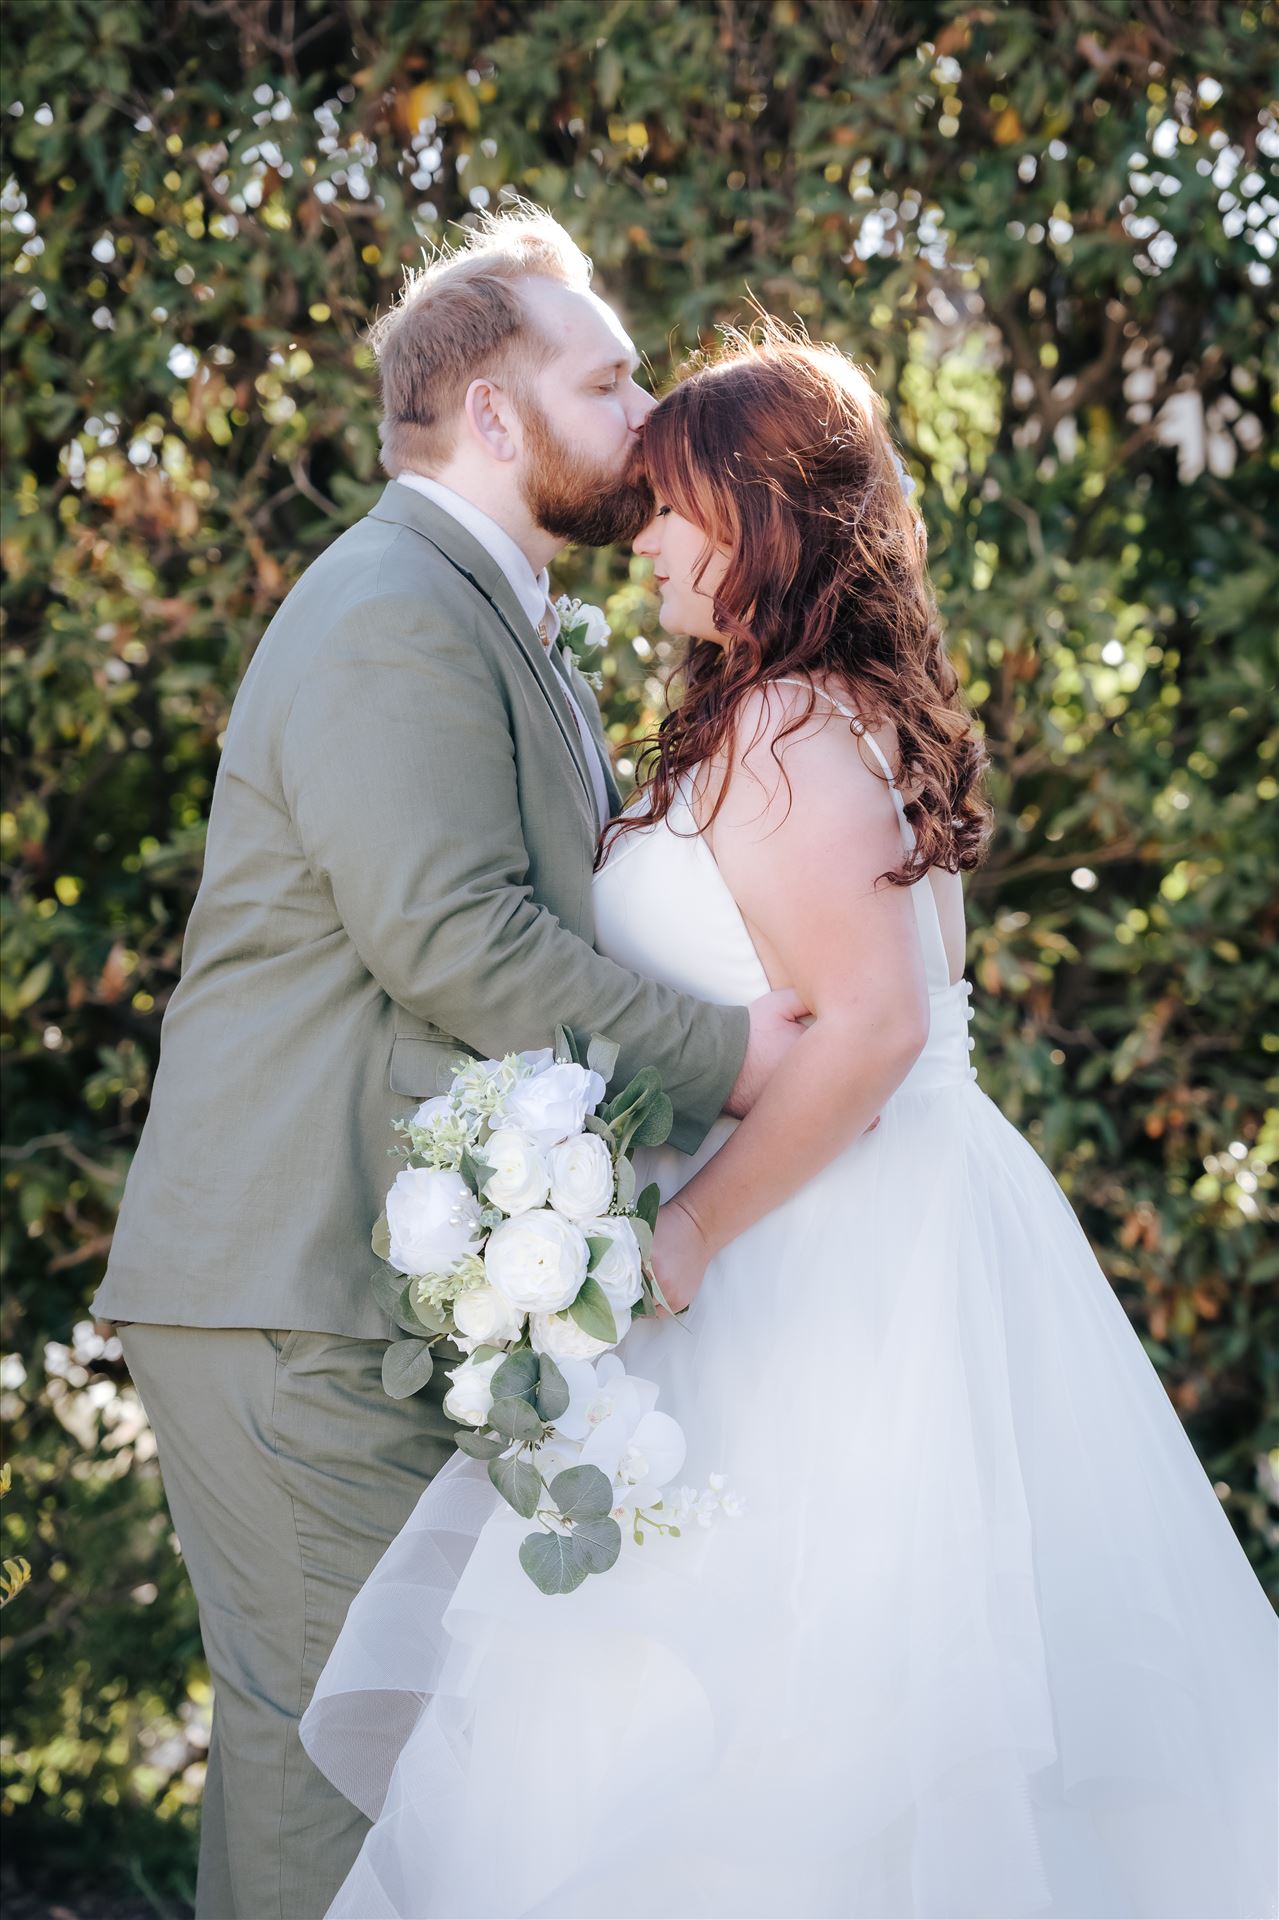 Final-.jpg Sarah Williams of Mirror's Edge Photography, a San Luis Obispo County Wedding and Engagement Photographer, captures the amazing wedding of Justine and Reece at the Monday Club in San Luis Obispo California. Gorgeous Bride and Groom forehead kiss by Sarah Williams